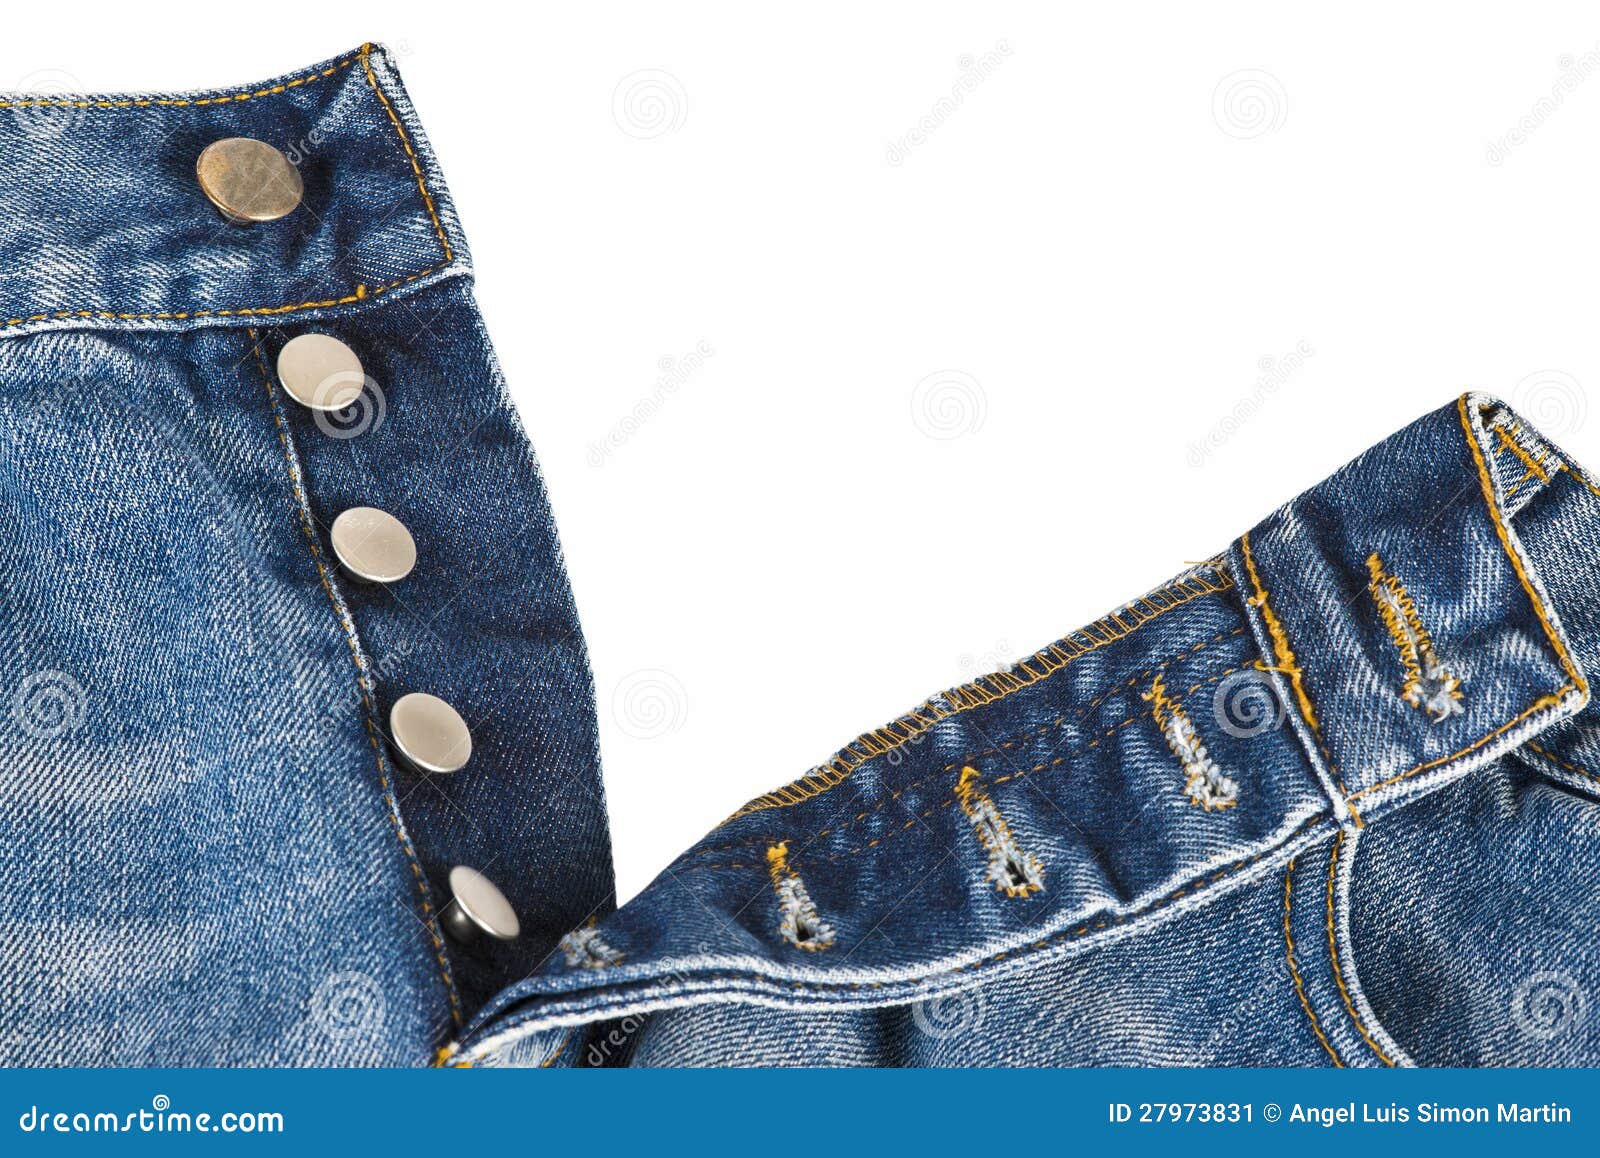 fly of the jeans with button closure